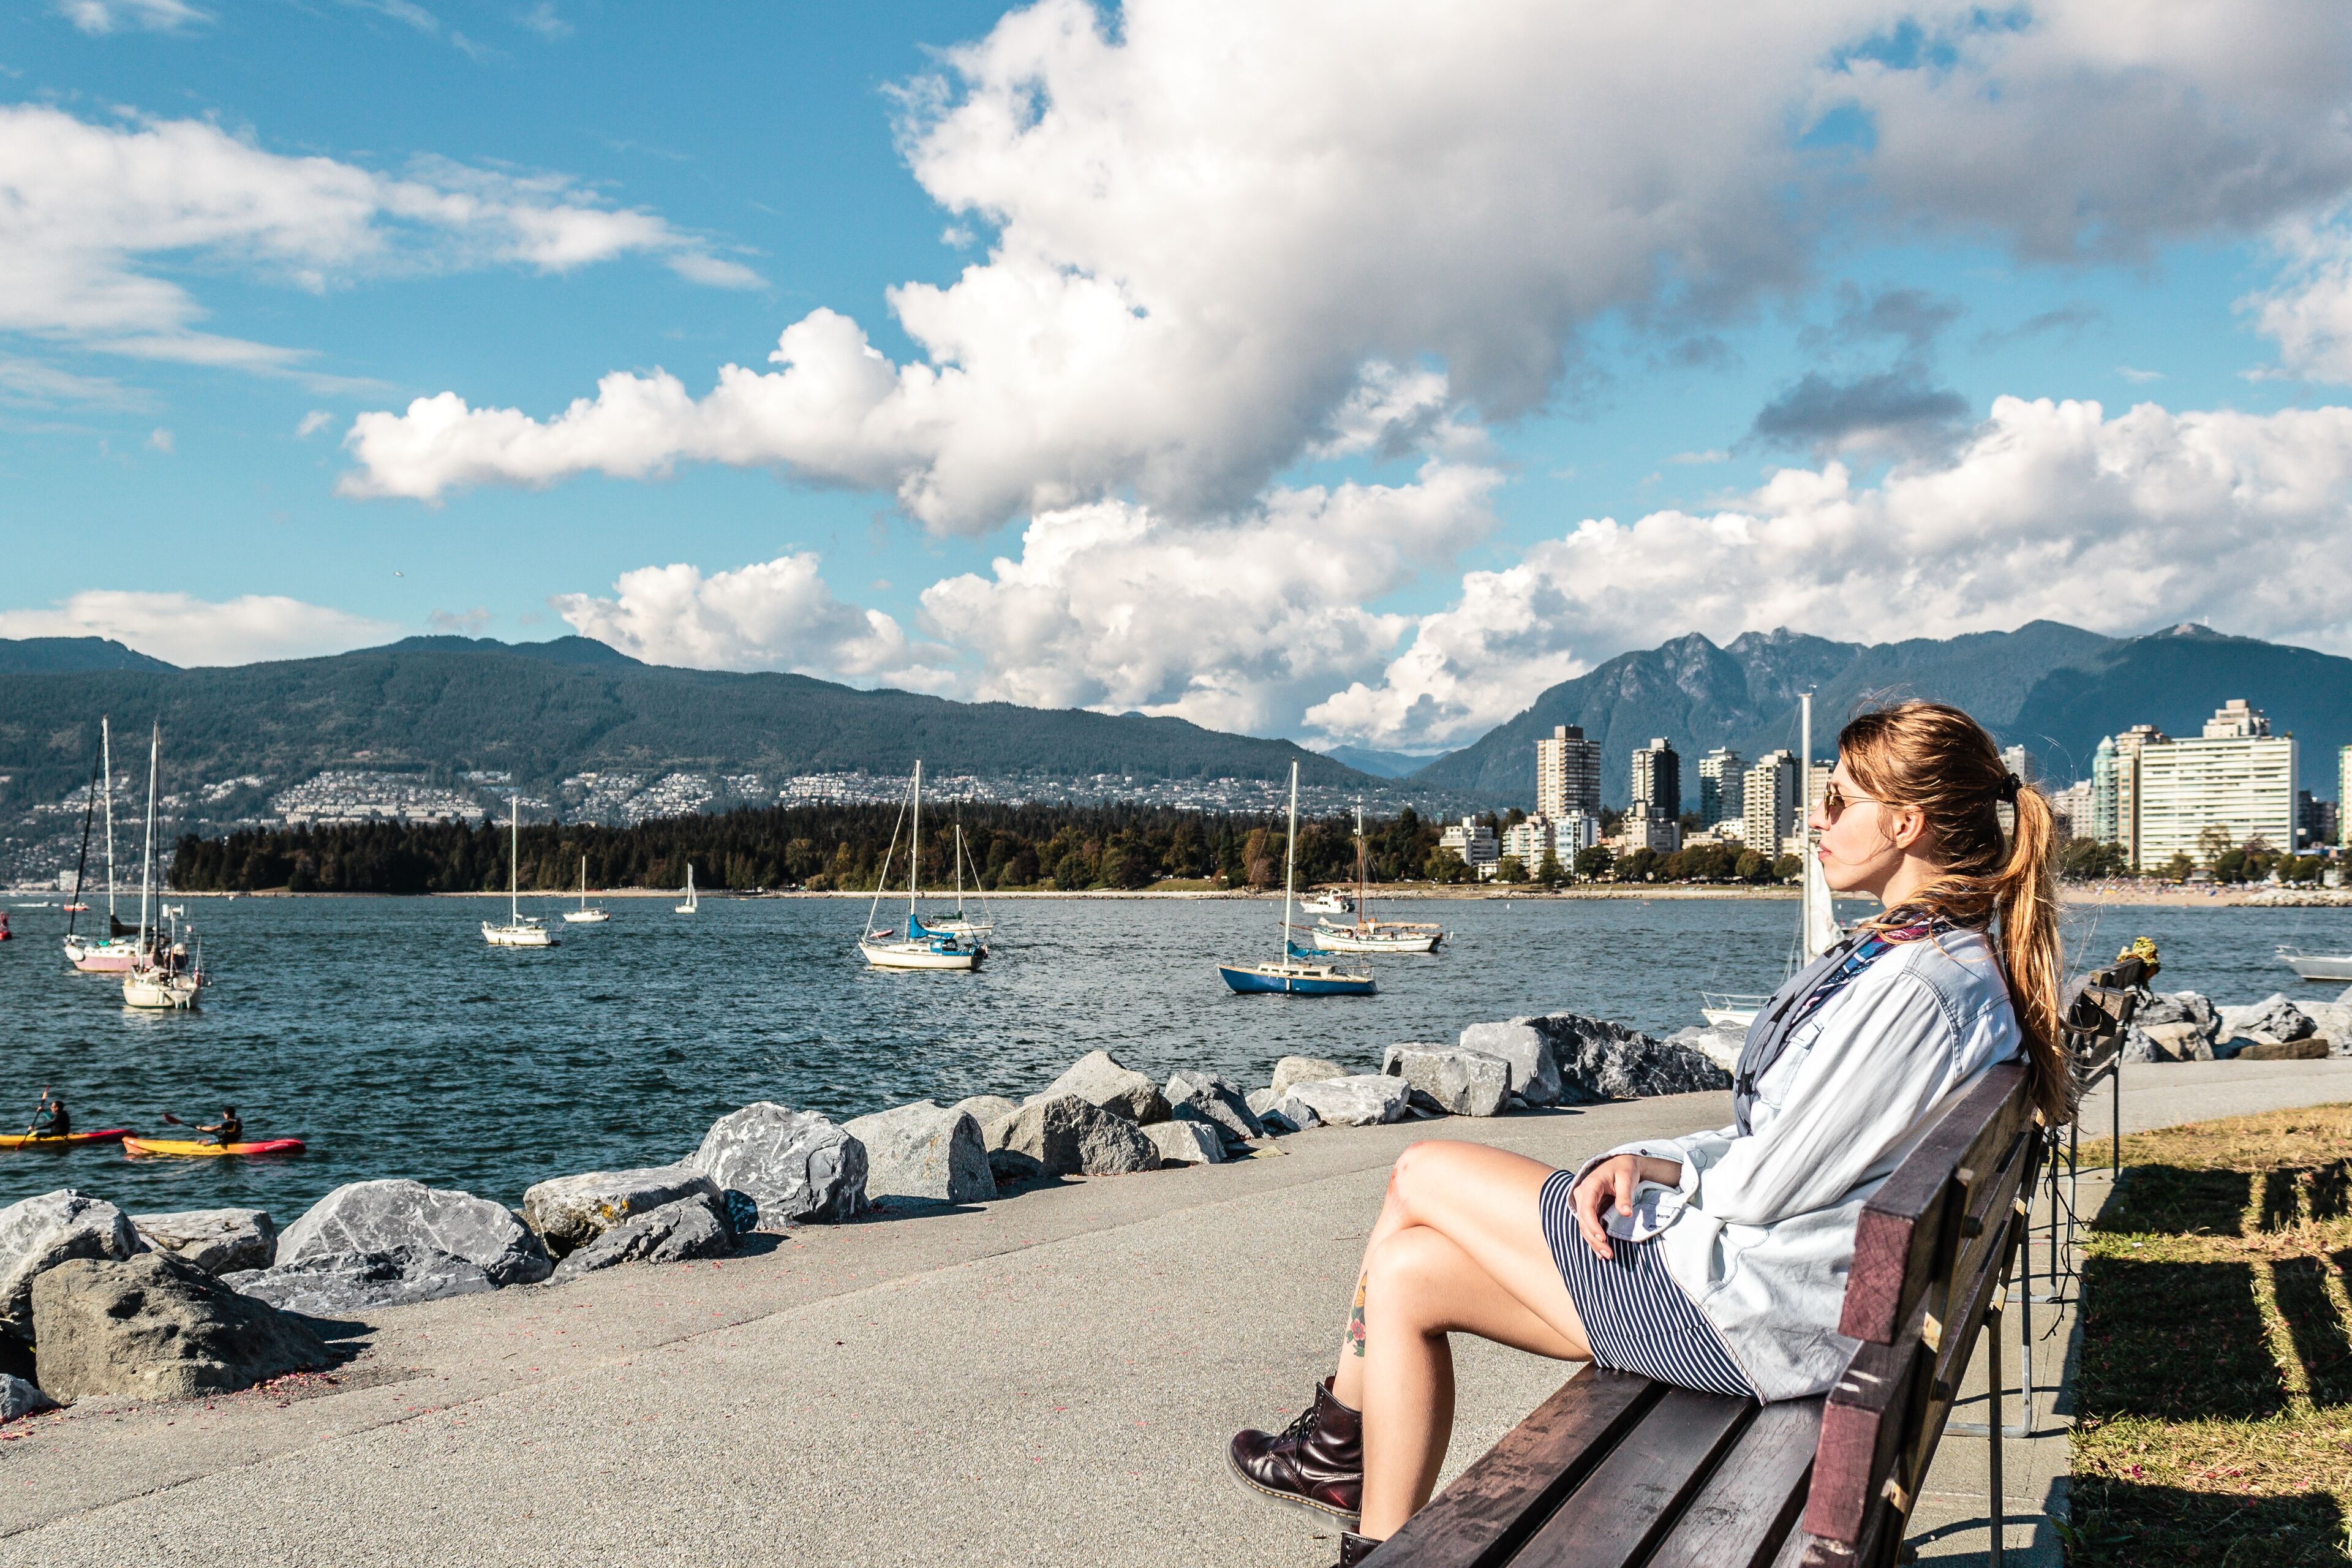 A person relaxes on a bench by the sea, gazing at sailboats and mountains under a partly cloudy sky.